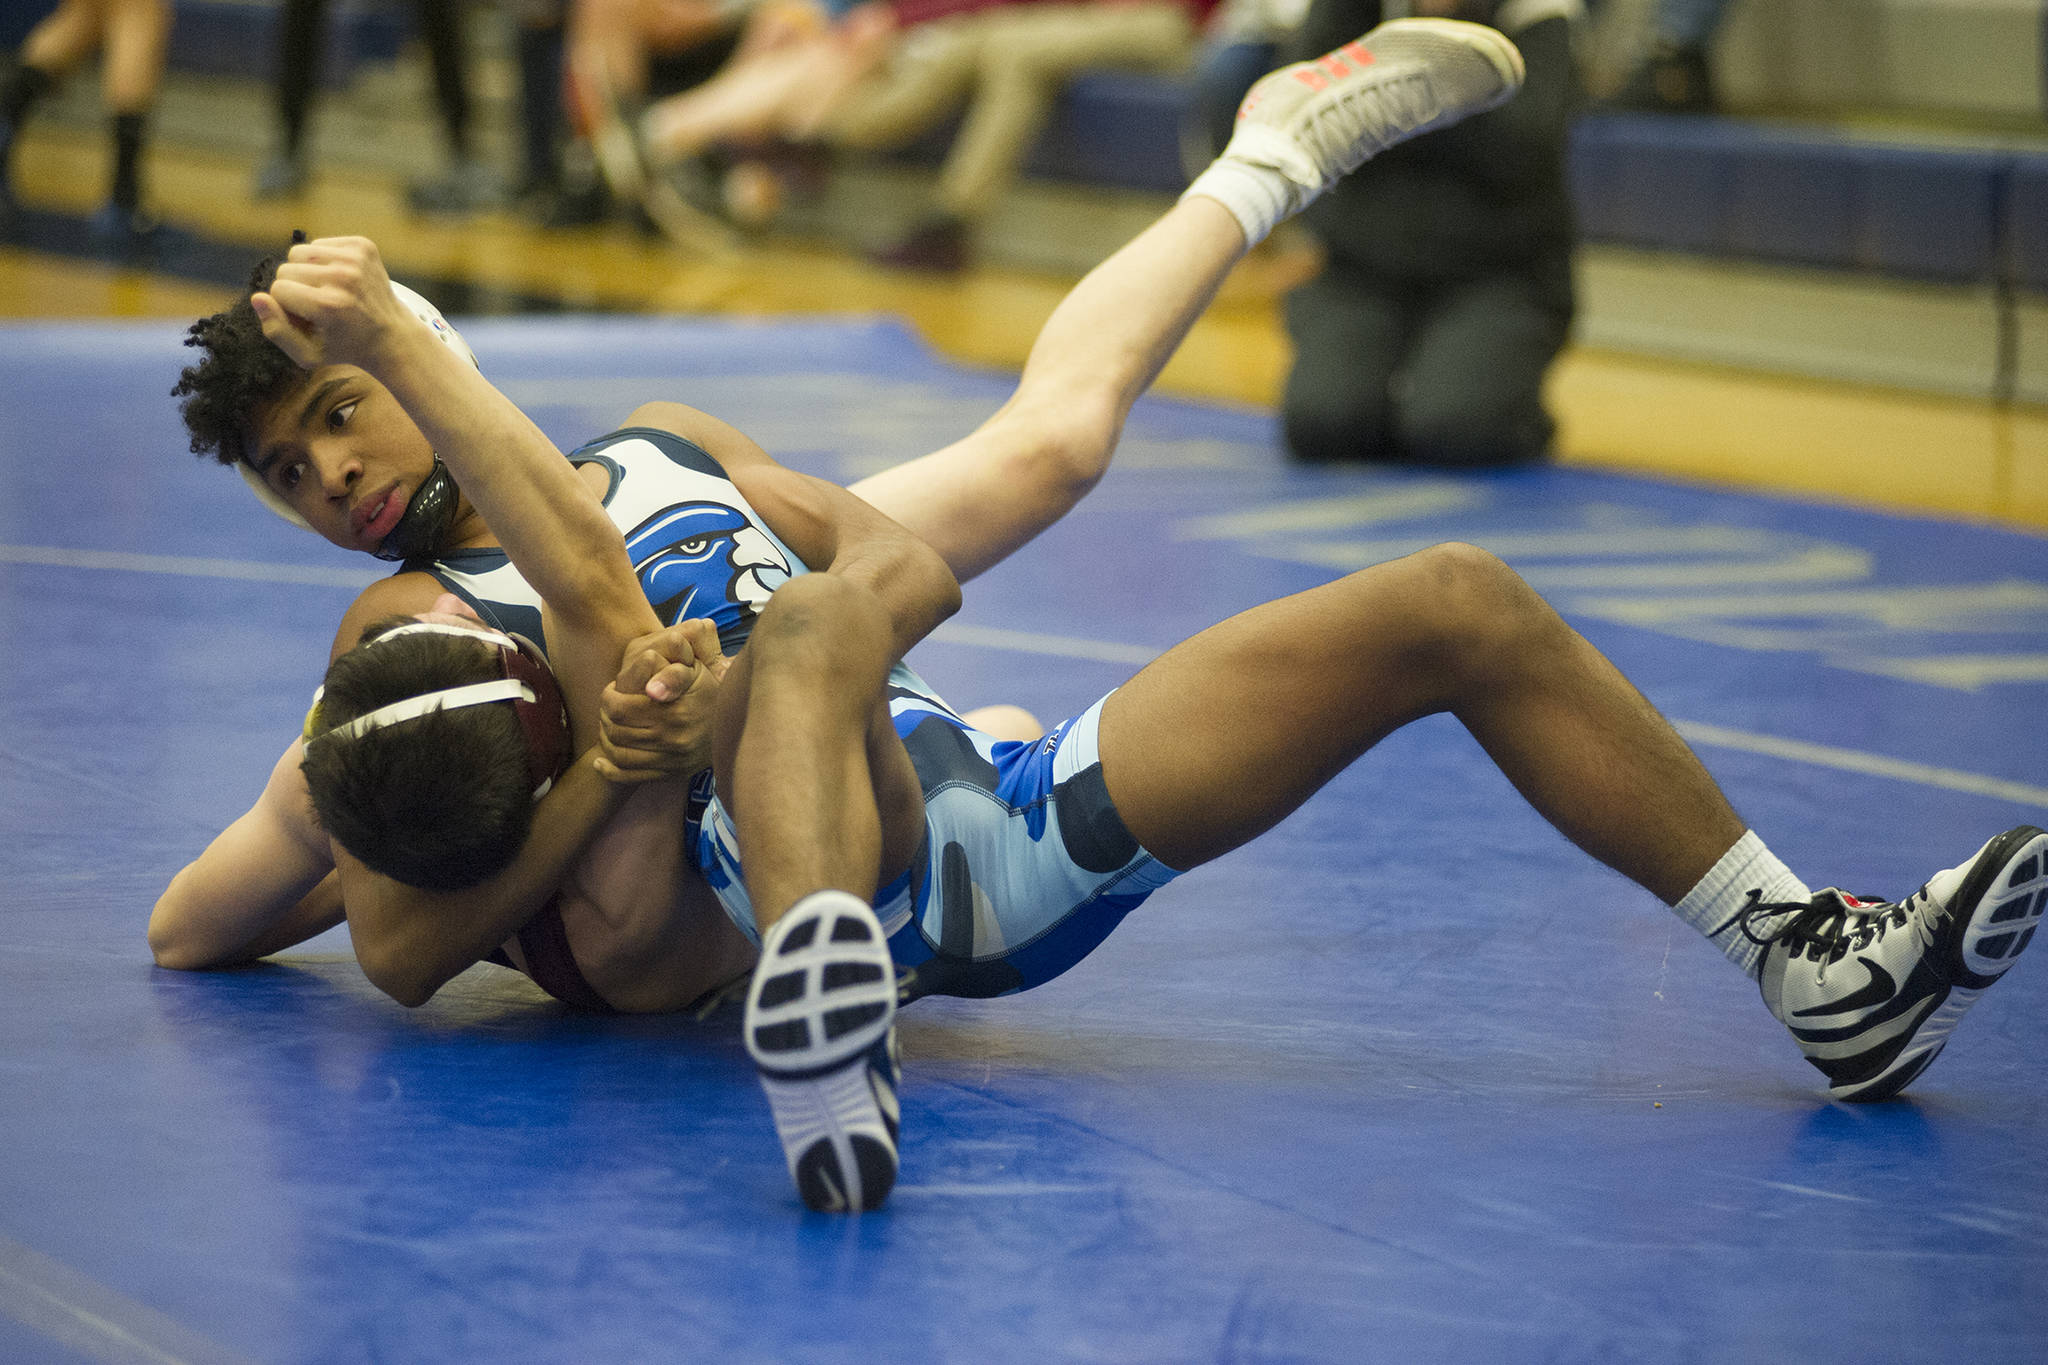 <span class="neFMT neFMT_PhotoCredit"><strong> Nolin Ainsworth</strong> | Juneau Empire</span>                                Juneau-Douglas junior Jahrease Mays looks over at the official as he pins Ketchikan’s Patrick Rauwolf in the 125-pound bracket final of the Brandon Pilot Invitational on Saturday at Thunder Mountain High School. Mays won soon after.